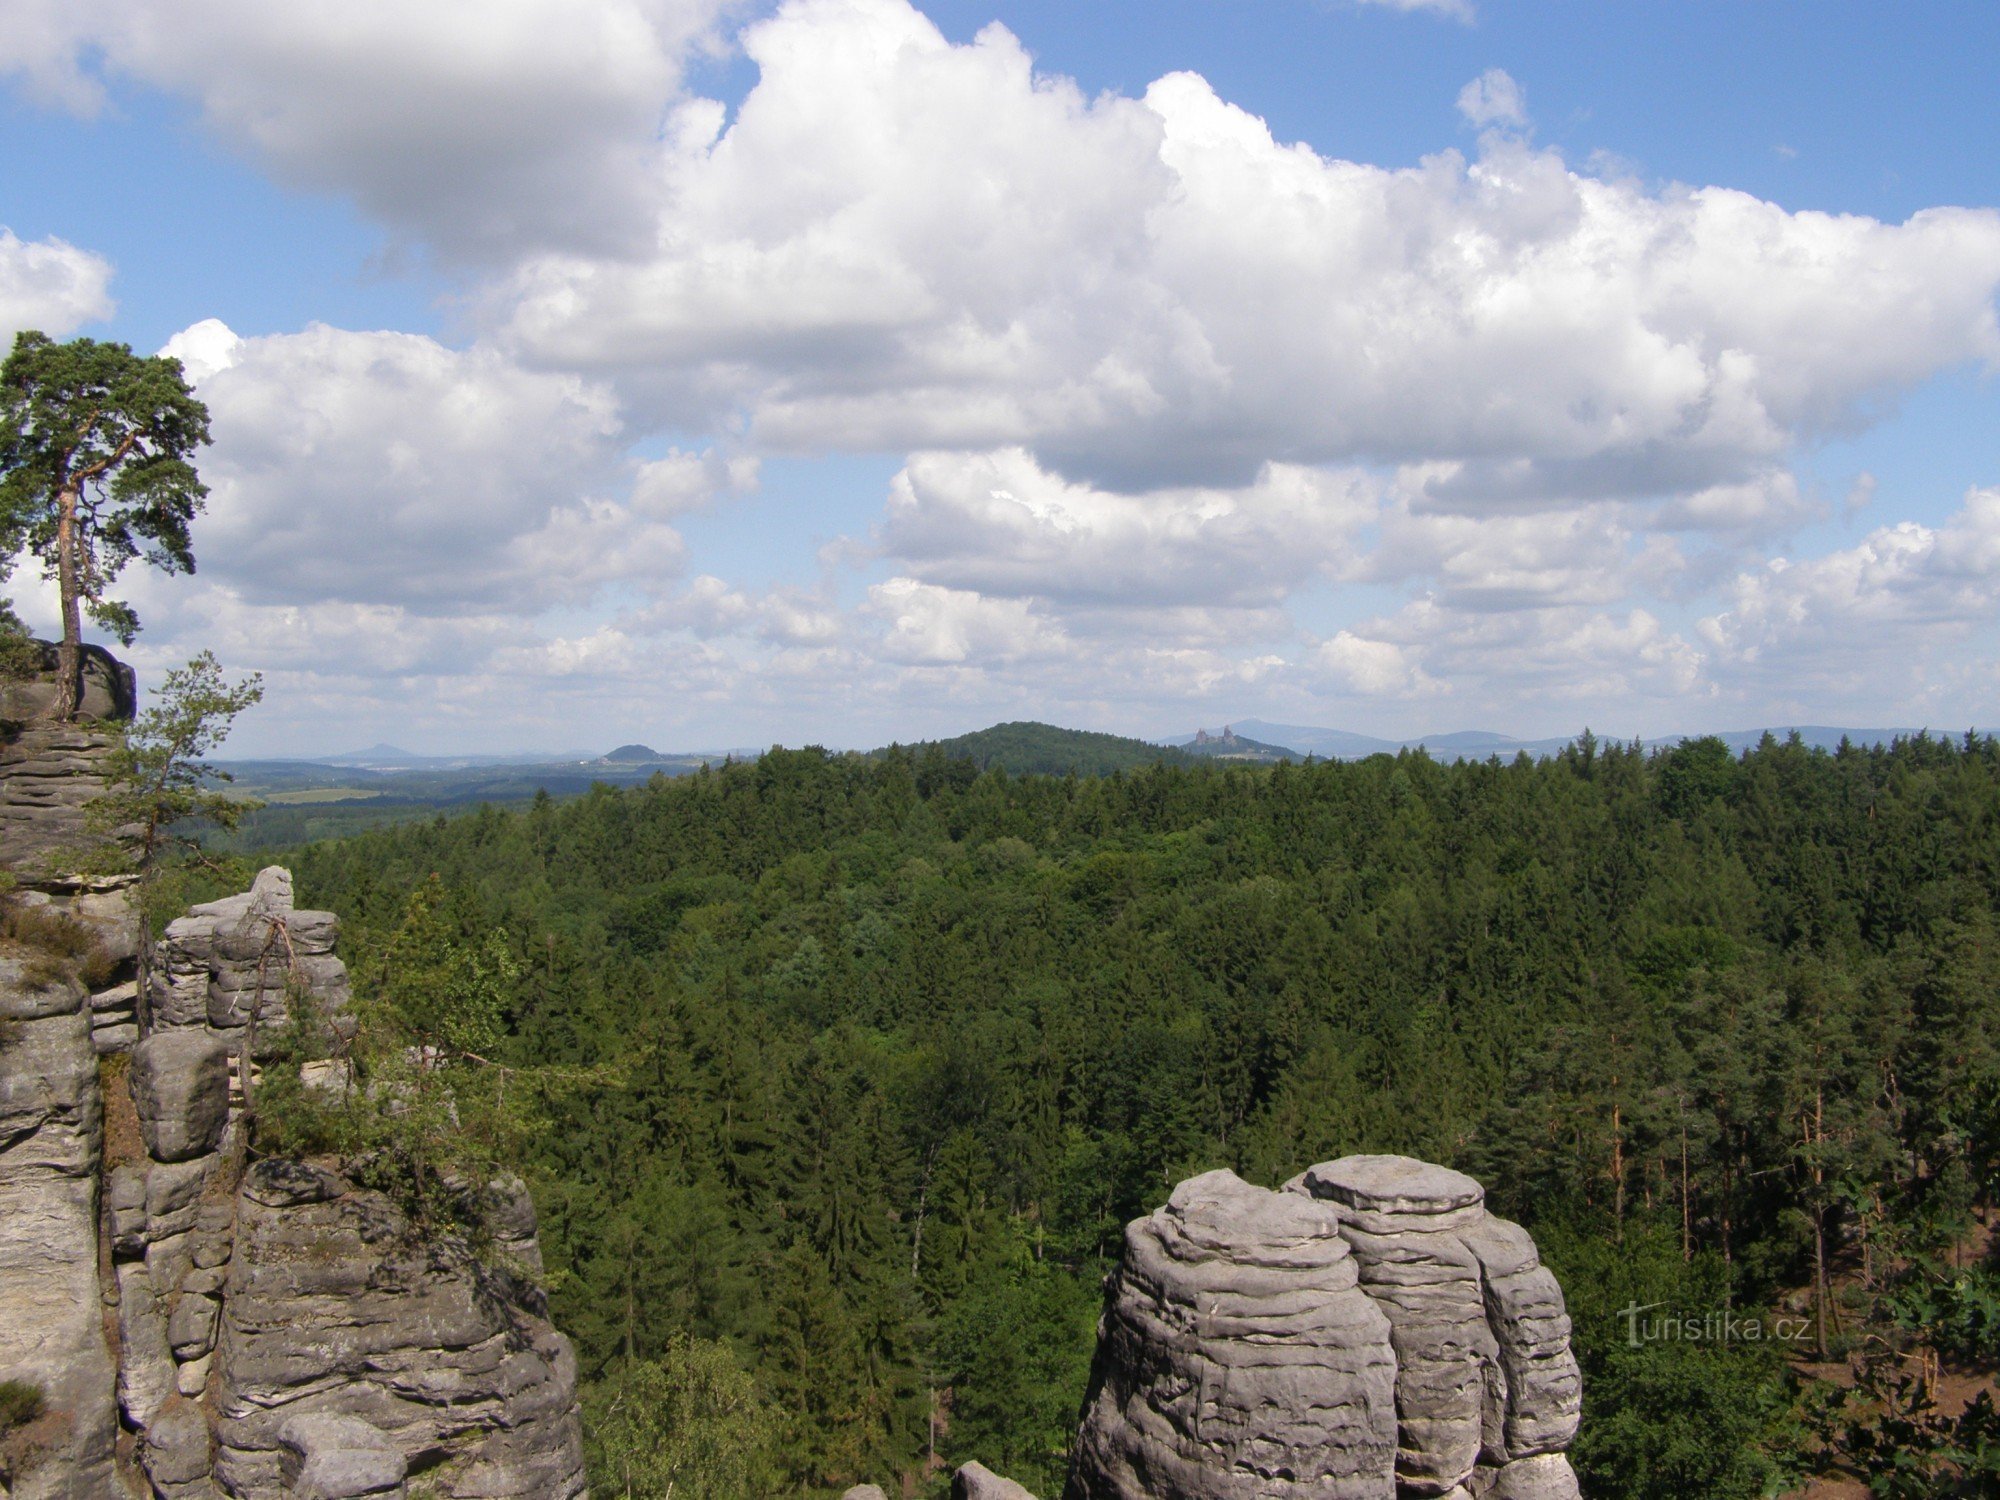 View of the Bohemian Paradise